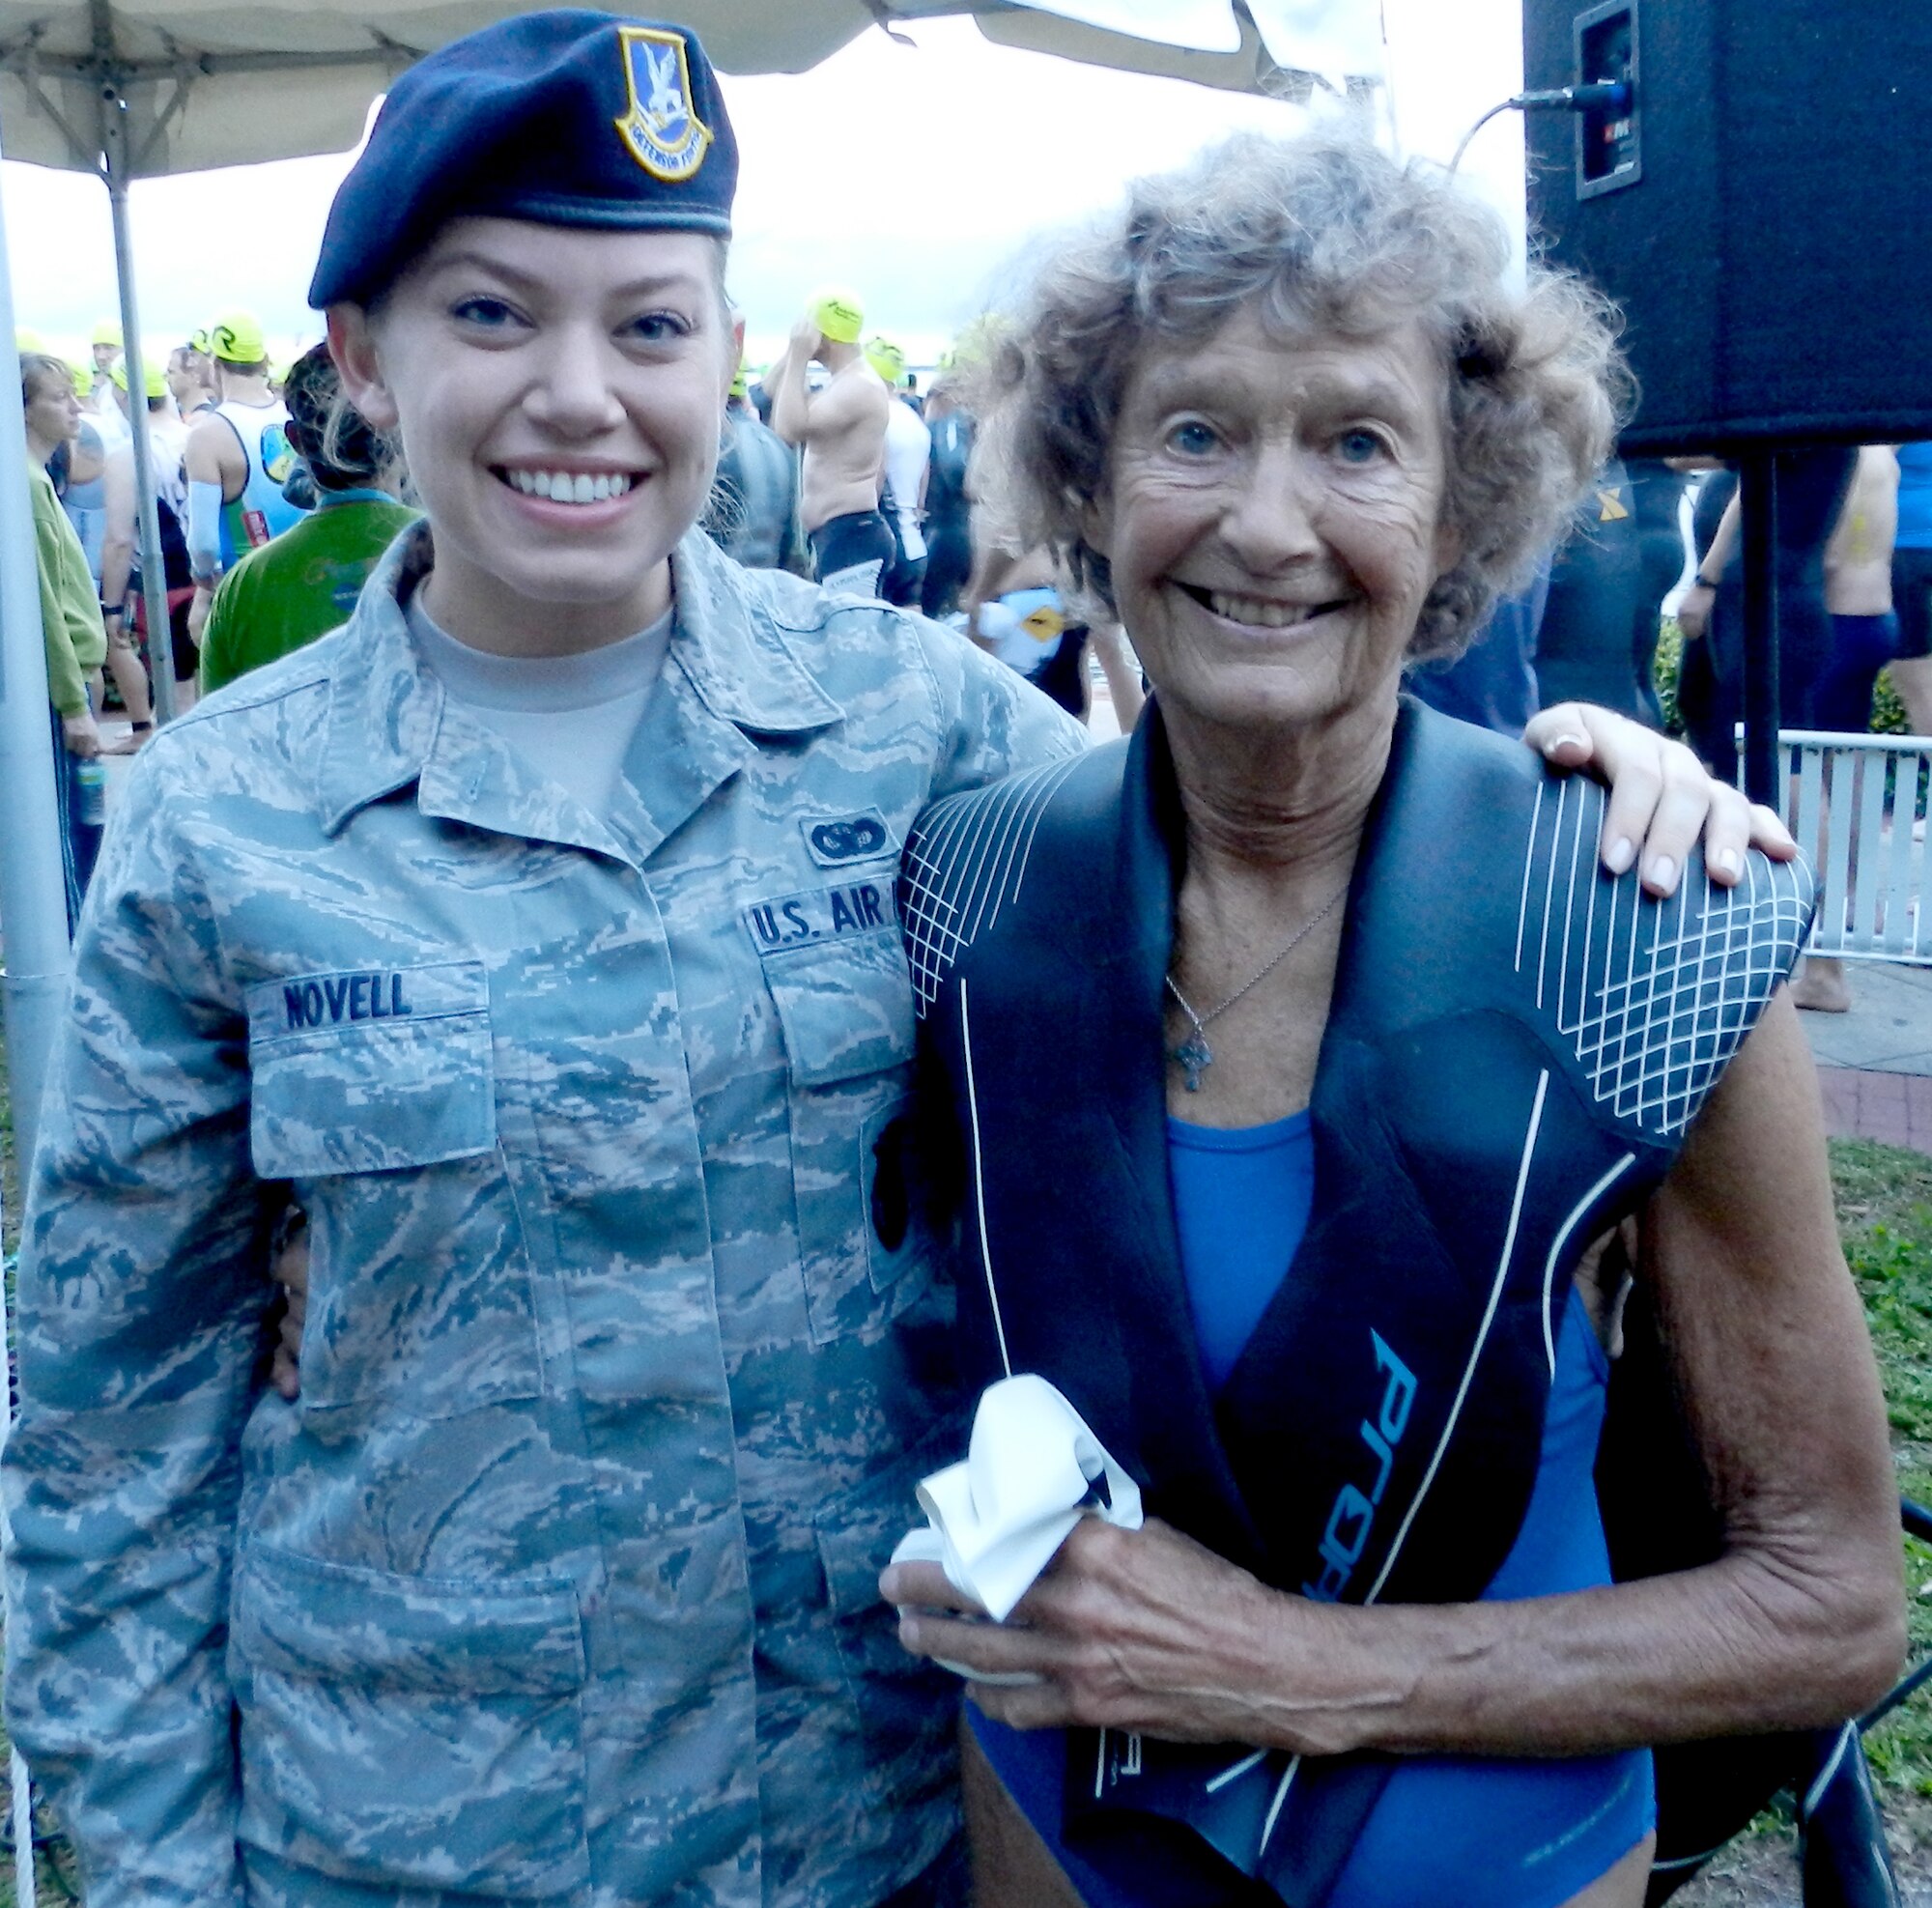 After belting out the national anthem at the May 5 Rocketman Triathlon, Air Force Reservist Senior Airman Caitlin Novell, 920th Rescue Wing, Patrick Air Force Base, Fla., posed with one the participants, Sister Madonna, otherwise known at the the Iron Nun. Not only did Sister Madonna give the invocation, but at 82, she also participated in, and finished the triathlon. During the opening ceremony, 1,600 athletes from around the globe gathered to pay respect to the nation, and pay tribute to the Boston Marathon bombing victims who were killed or injured during a terrorist attack at the finish line April 15. (U.S. Air Force photo/Maj. Don Kerr)